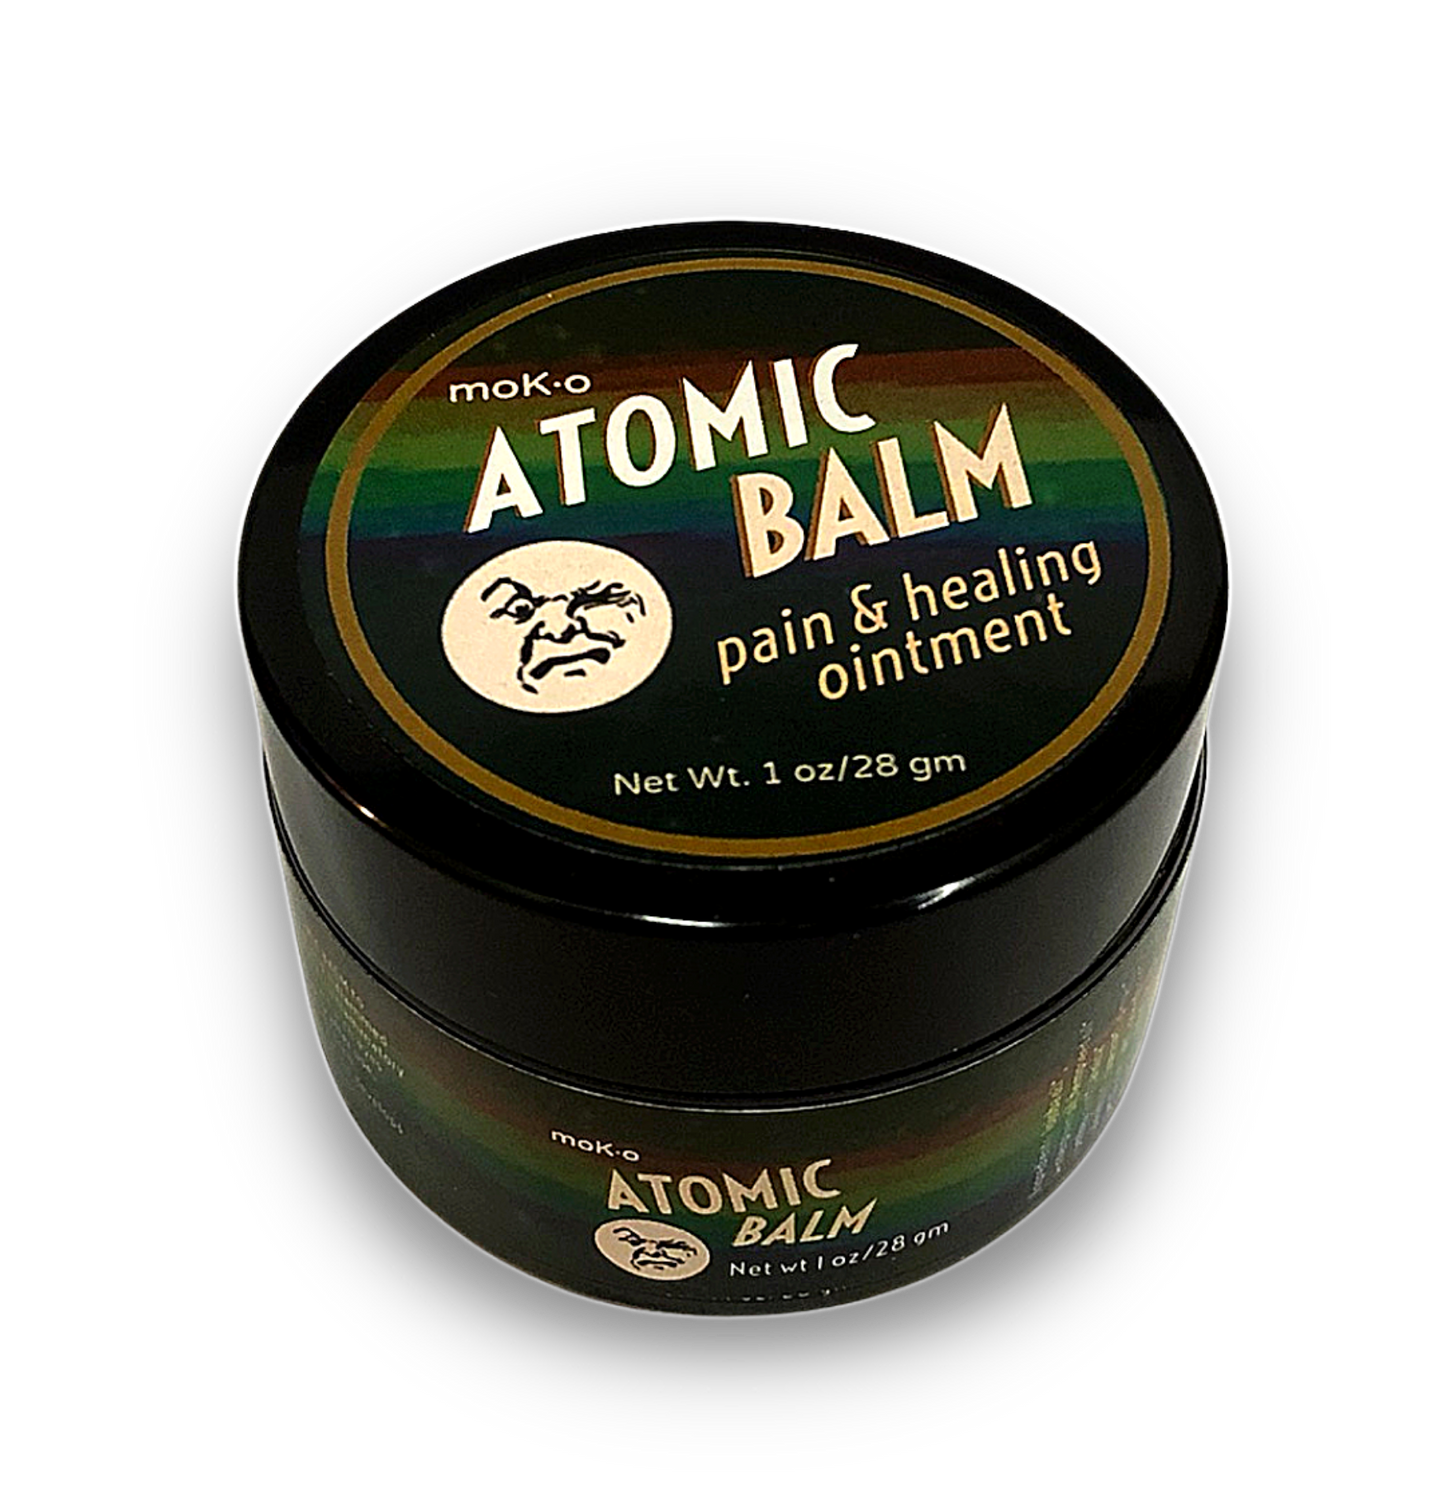 Atomic Balm is part of the Comfortably Numb® family of pain relievers. This seriously effective pain relieving salve goes to work almost immeditely to combat joint pain and inflammation.  Atomic Balm is a topical herbal infusion with arnica, calendula and other muscle relaxing herbs to ease pain and facilitate healing. 